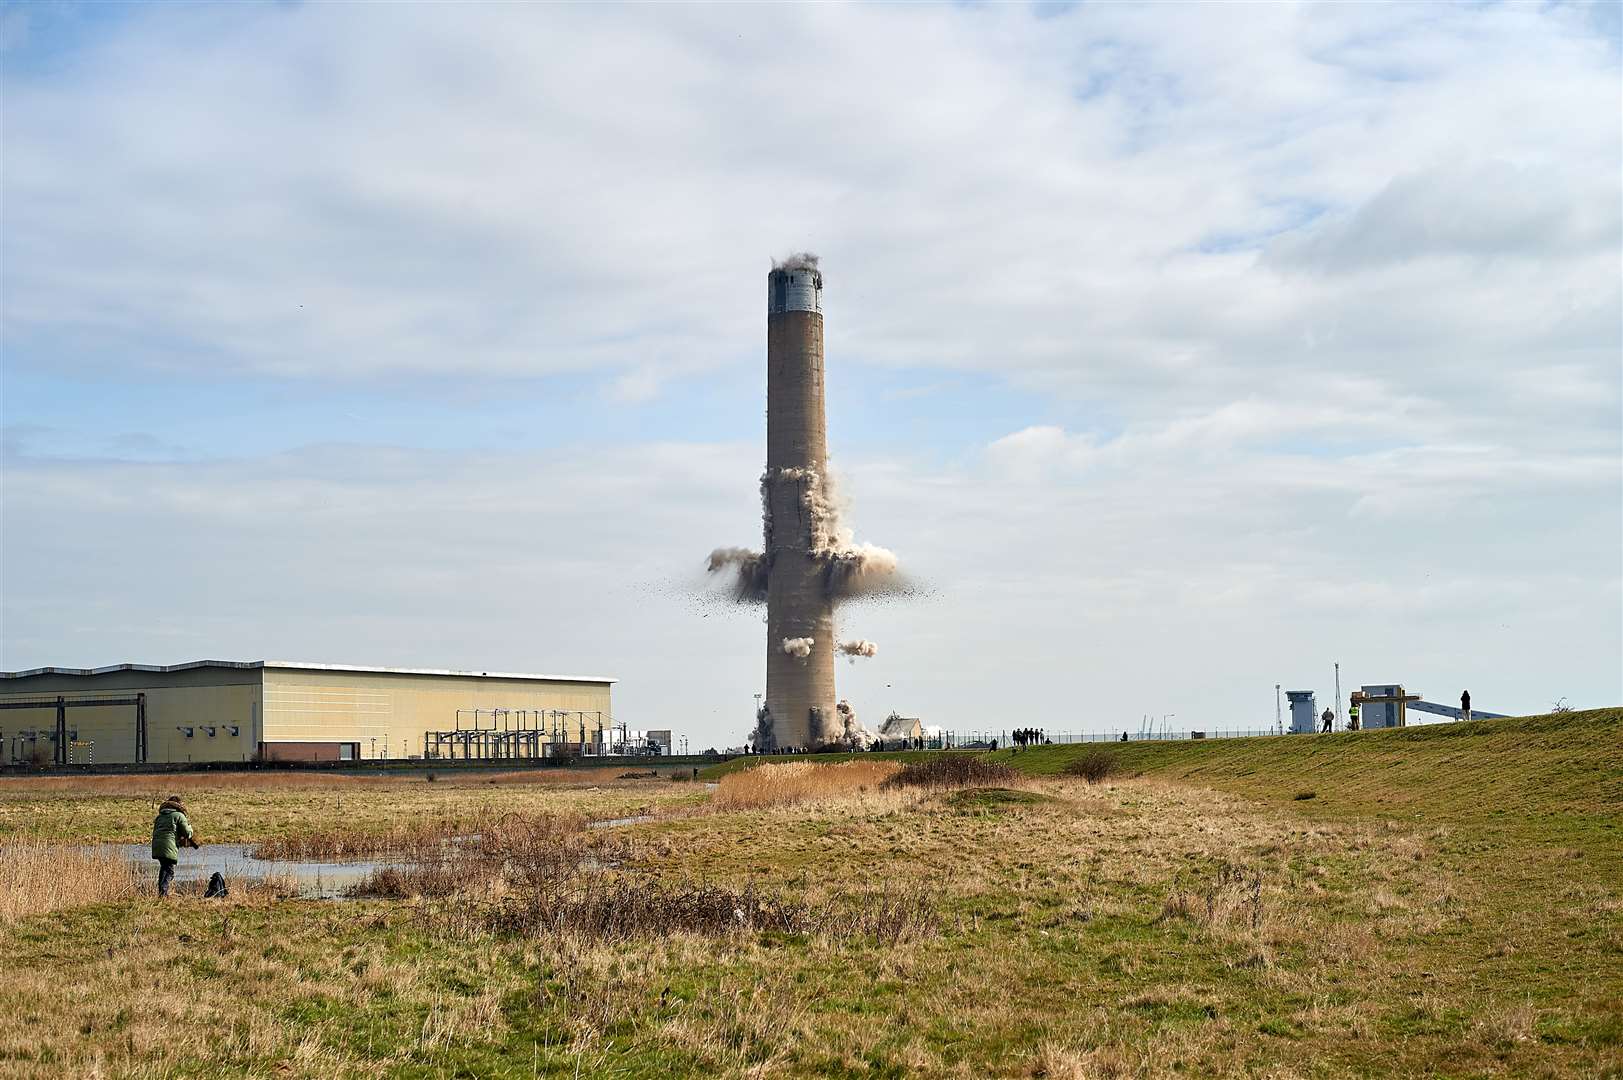 The demolition of one of the chimneys at Kingsnorth Power Station in 2018